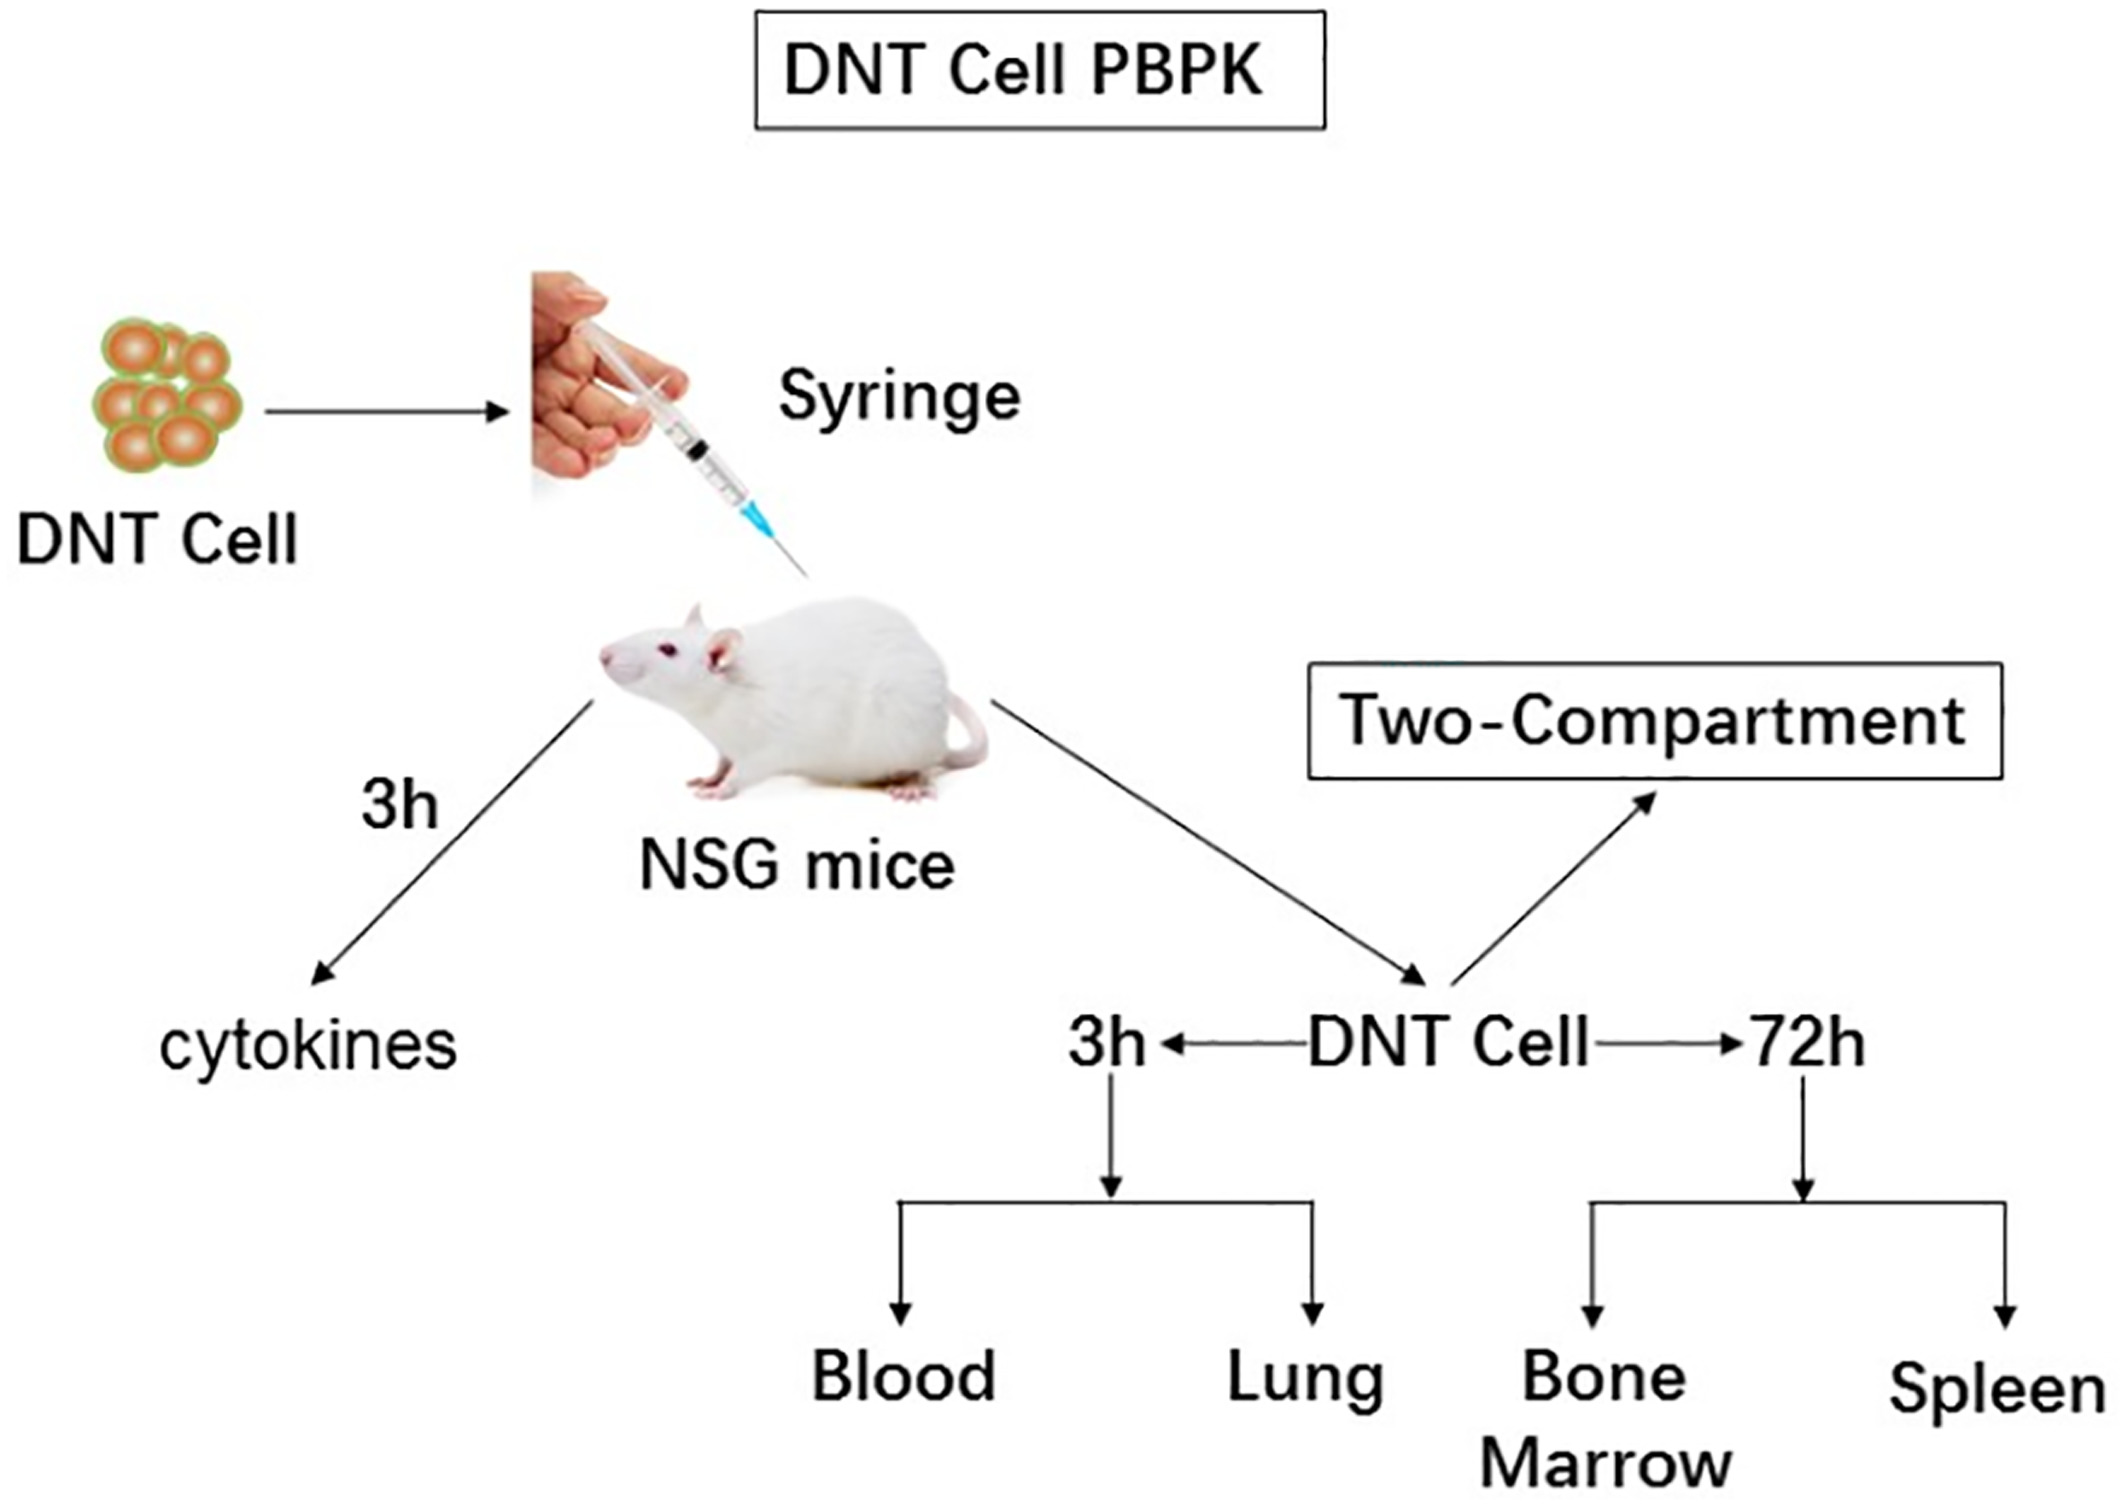 Profiling pharmacokinetics of double‐negative T cells and cytokines via a single intravenous administration in NSG mice